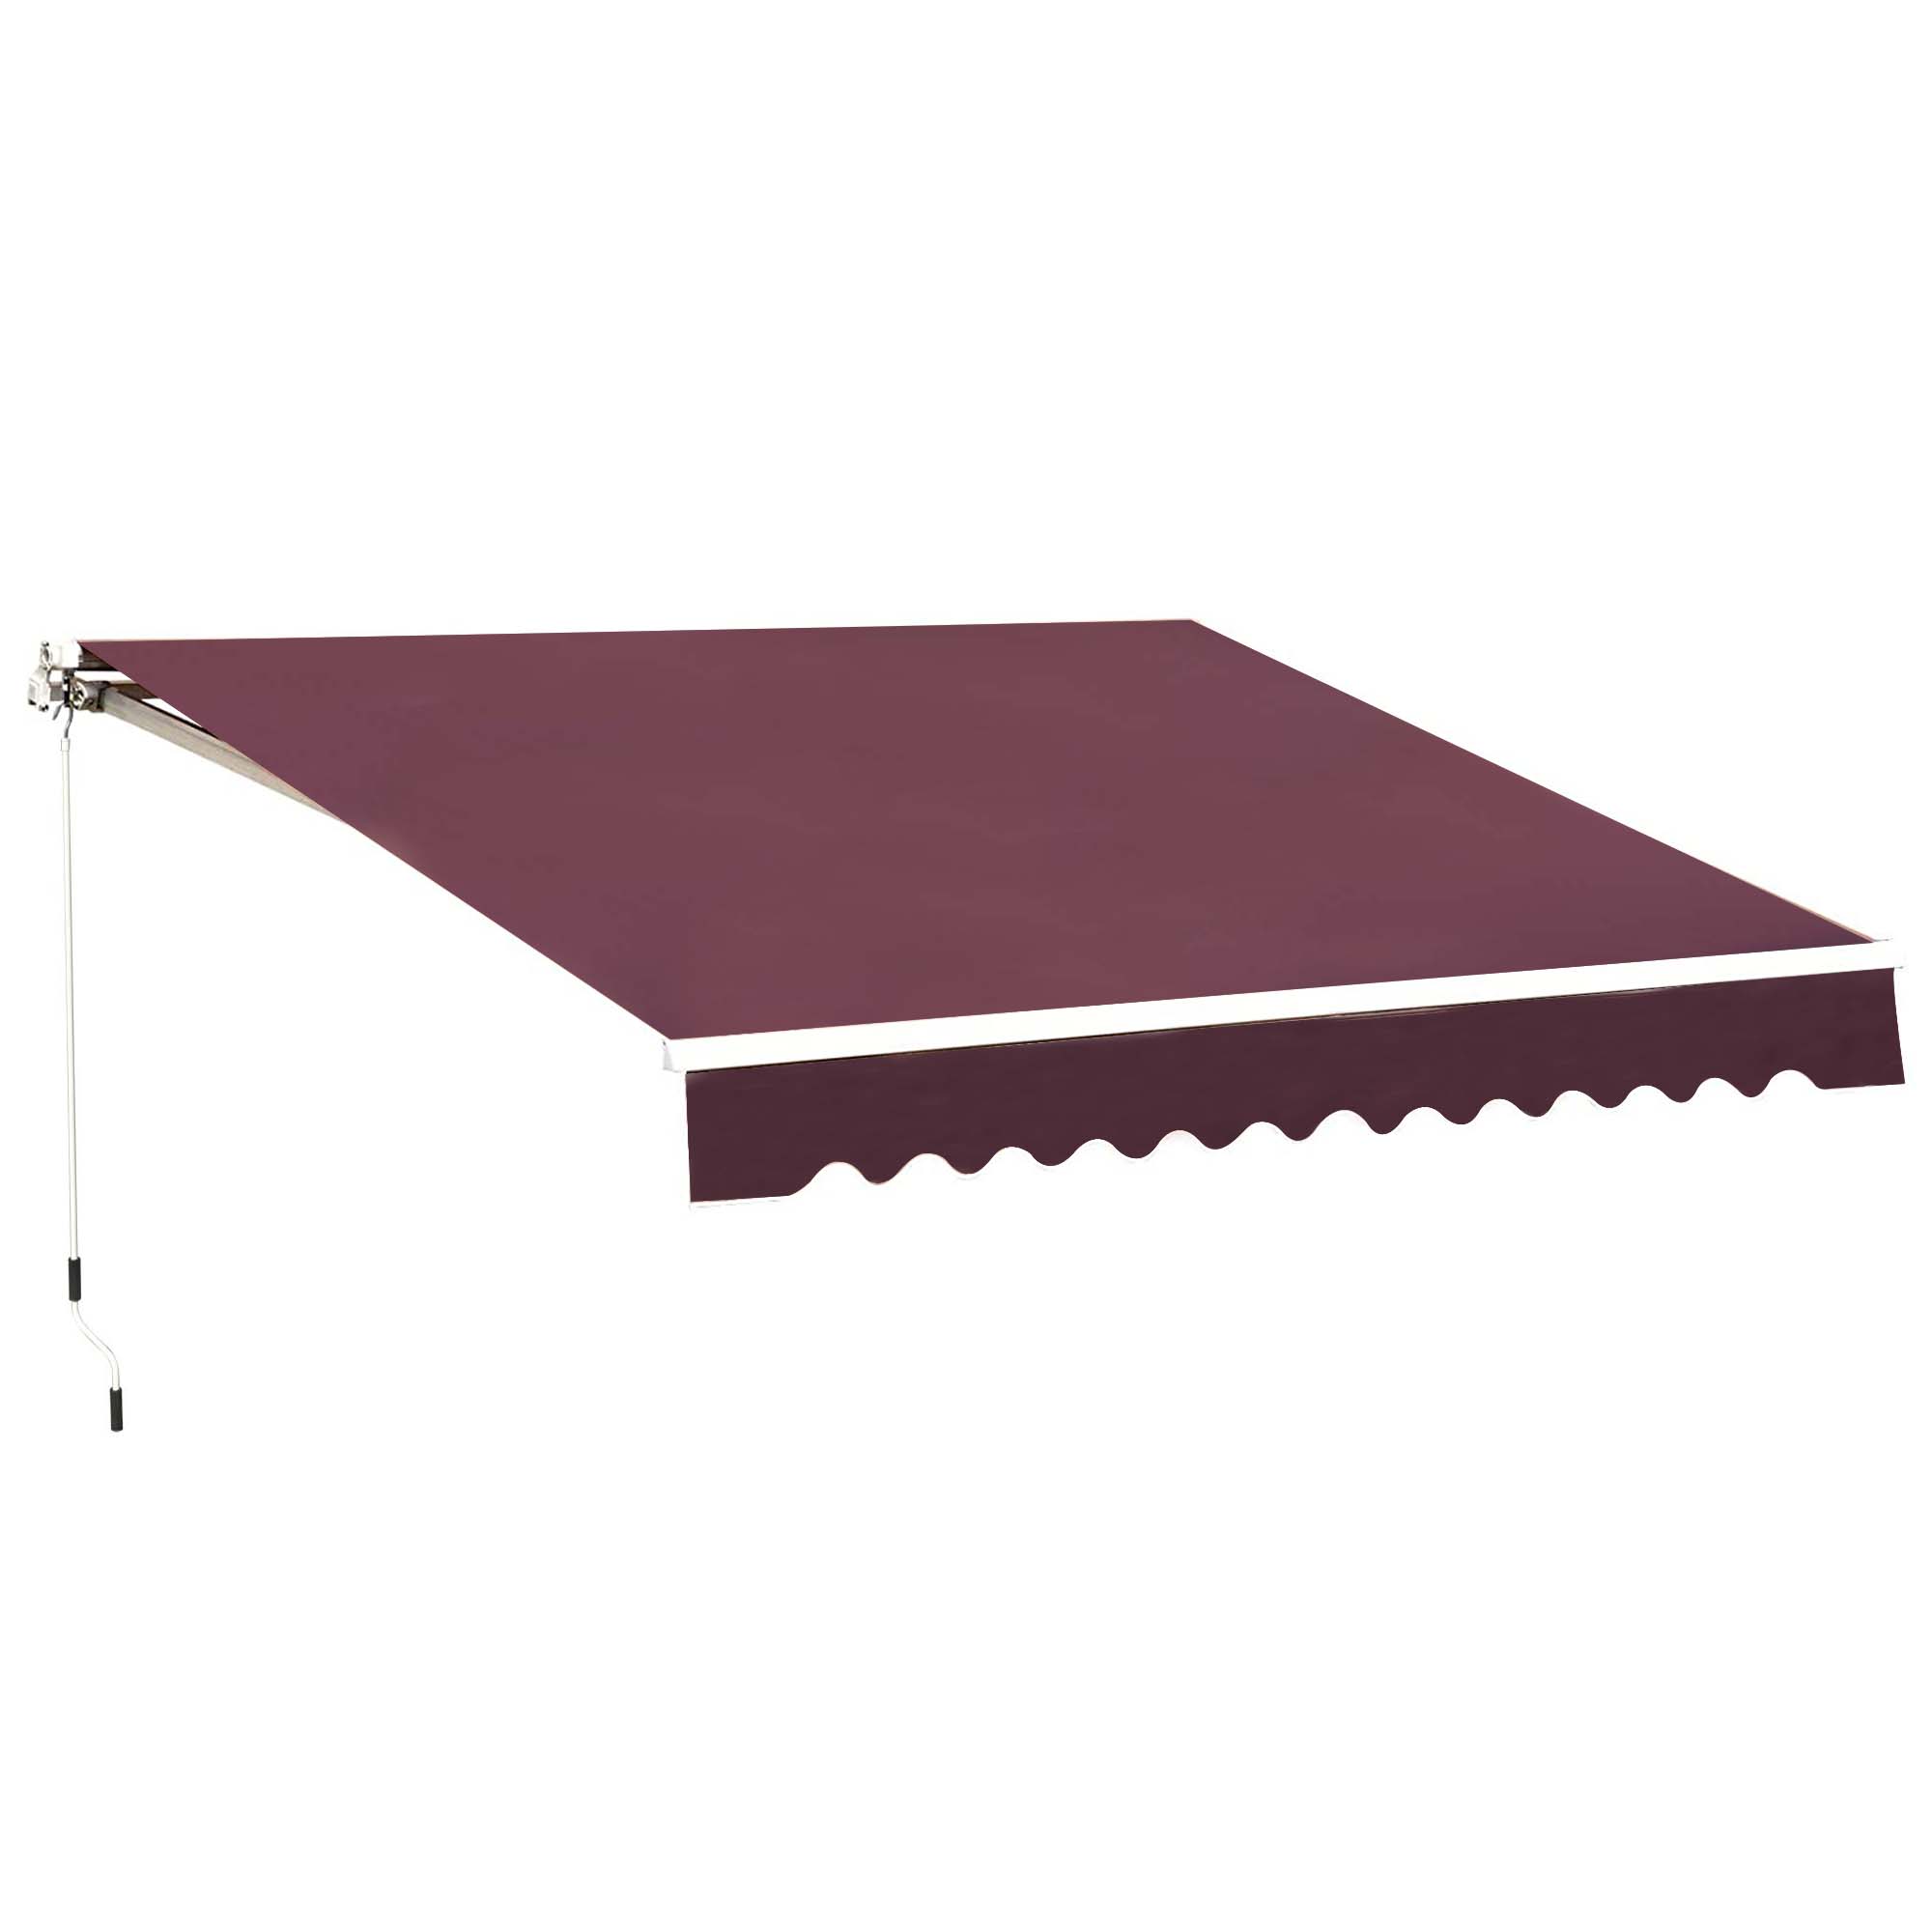 Outsunny Awning Canopy Sun Shade Canopy Garden Patio Manual Retractable Awning, 3x2.5 M-red